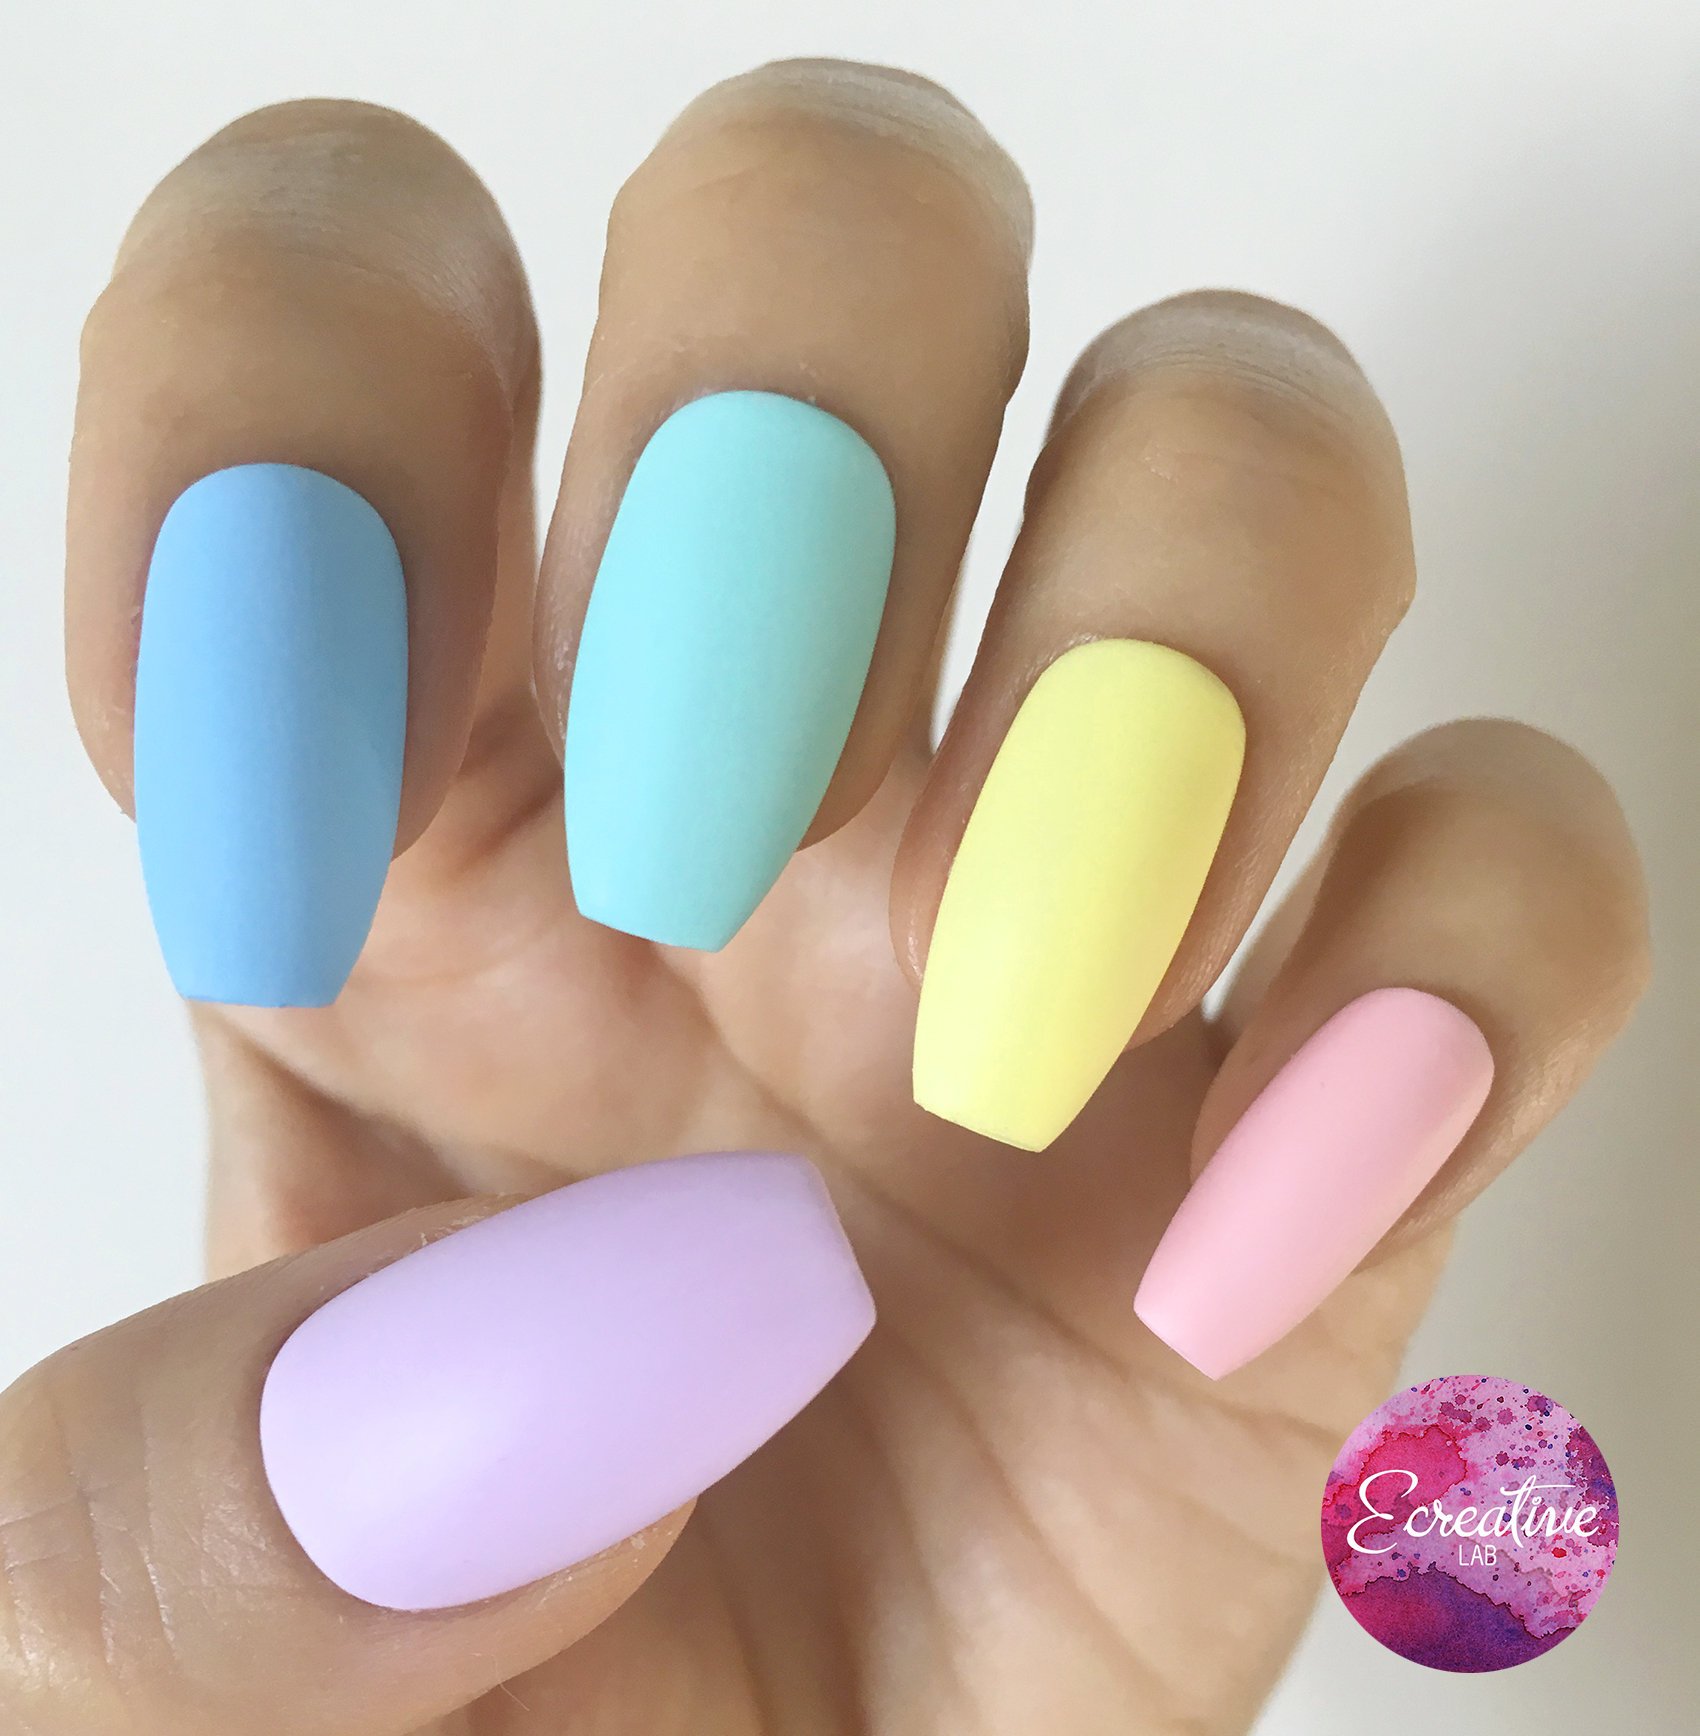 Essie Neon Nail Polish Review and Swatches - The Skincare Edit